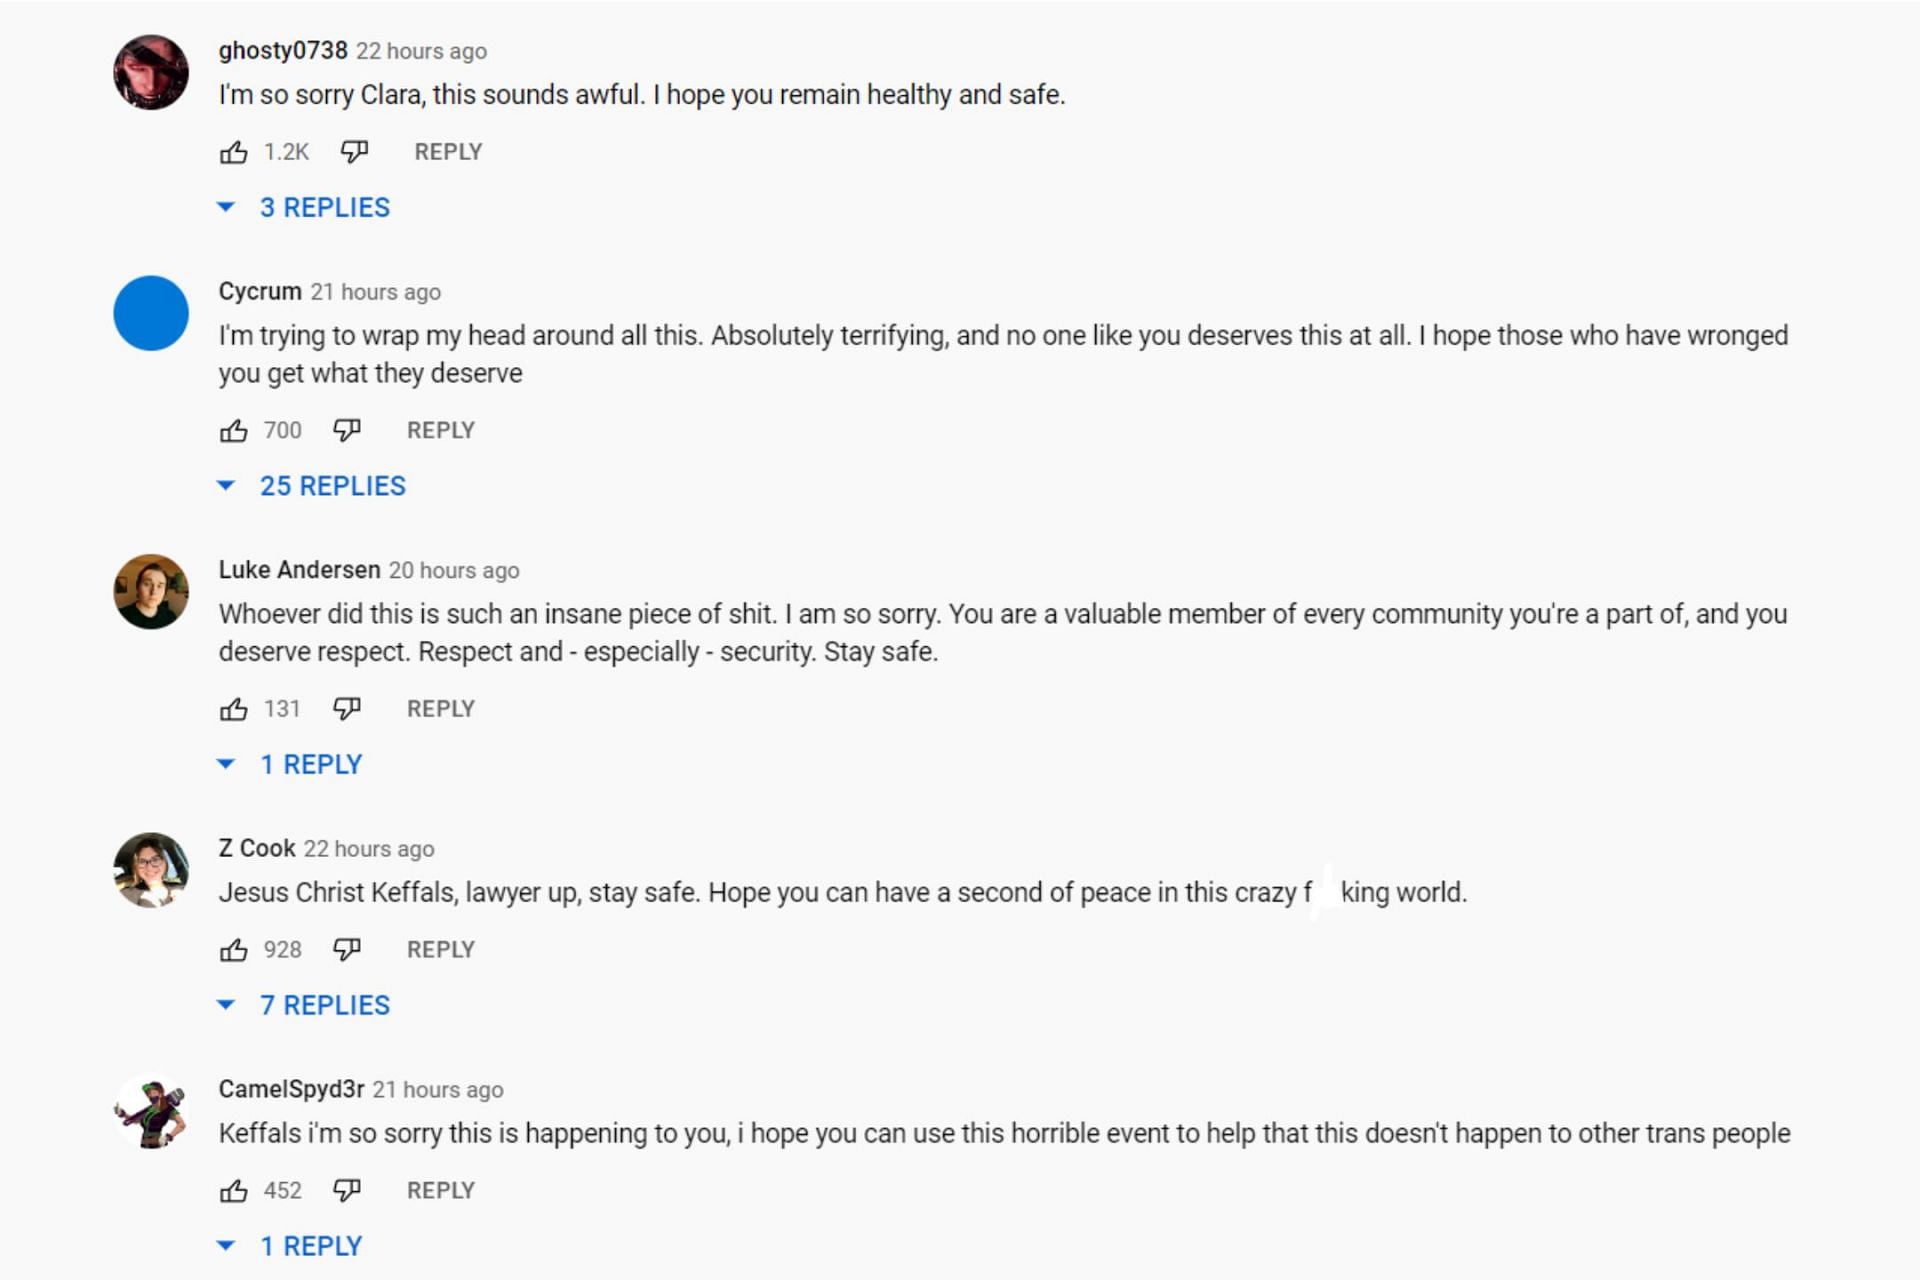 Comments on the YouTube video 1/2 (Image via Keffals/YouTube)